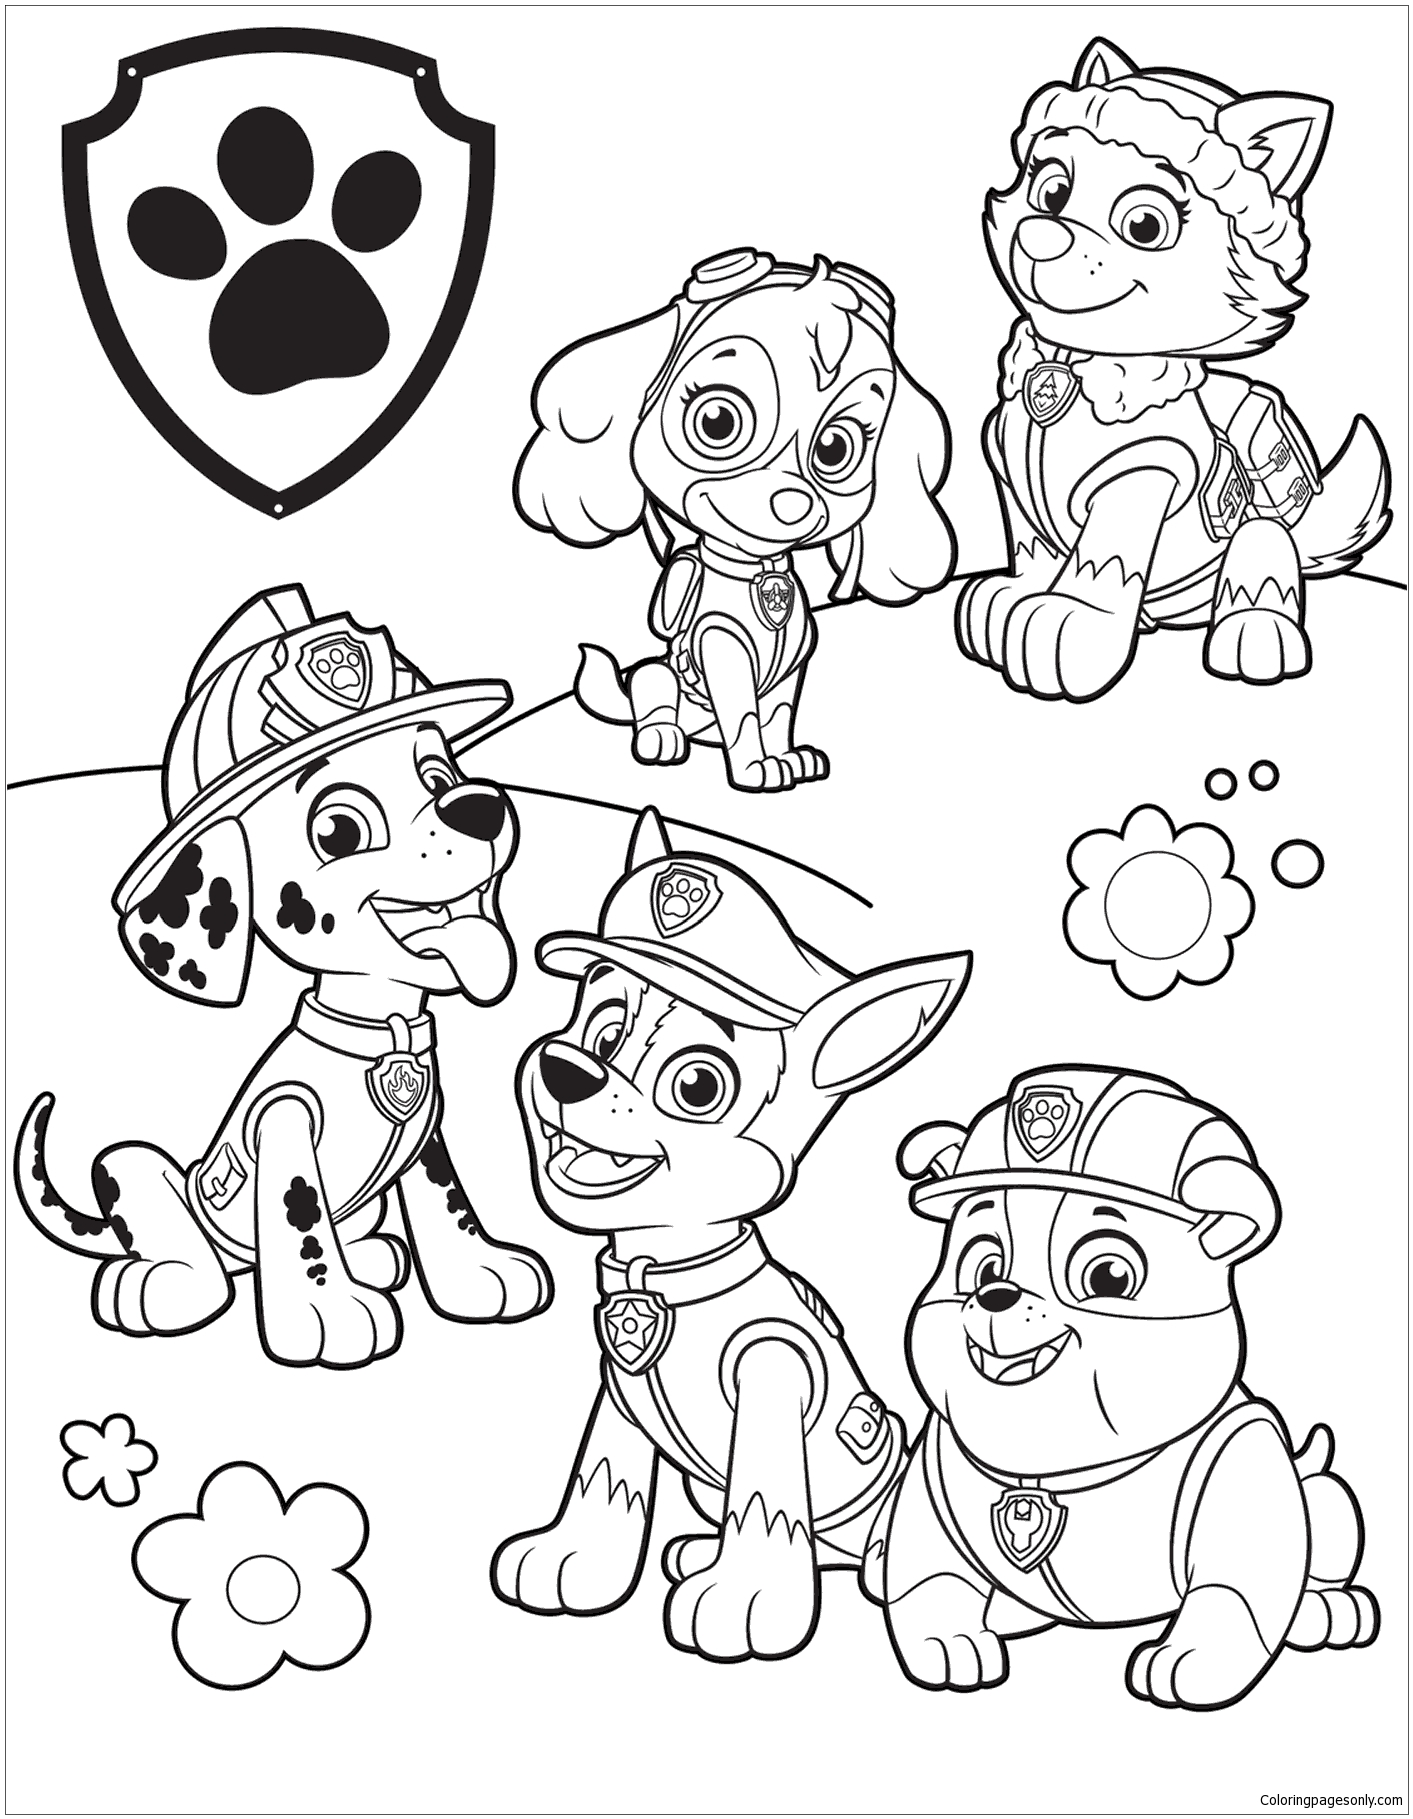 Coloring Pages Only: An Online Coloring Website For People Of All Ages